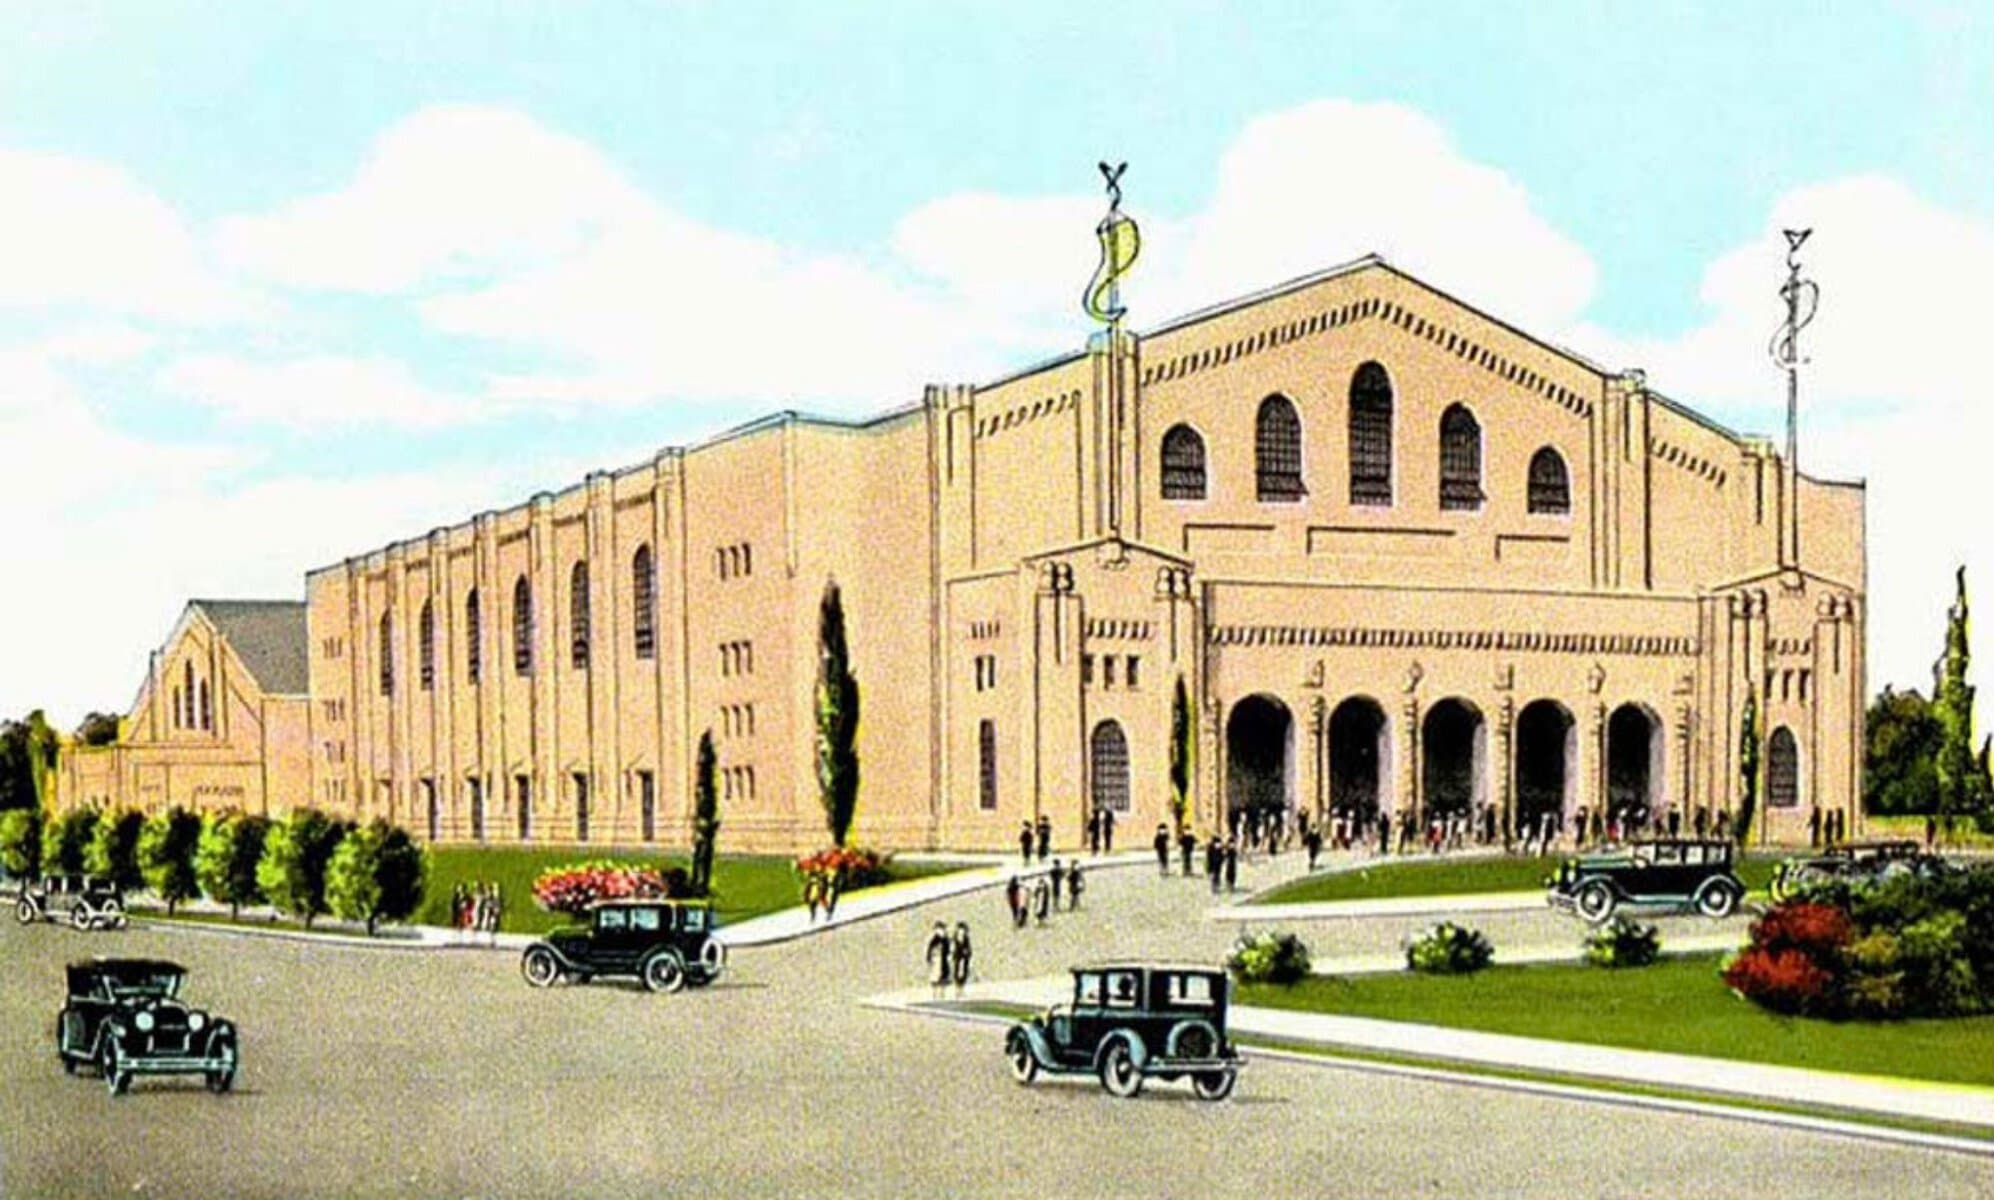 An illustration of the Seattle Civic Auditorium shows a grand tan building against an idyllic blue sky.